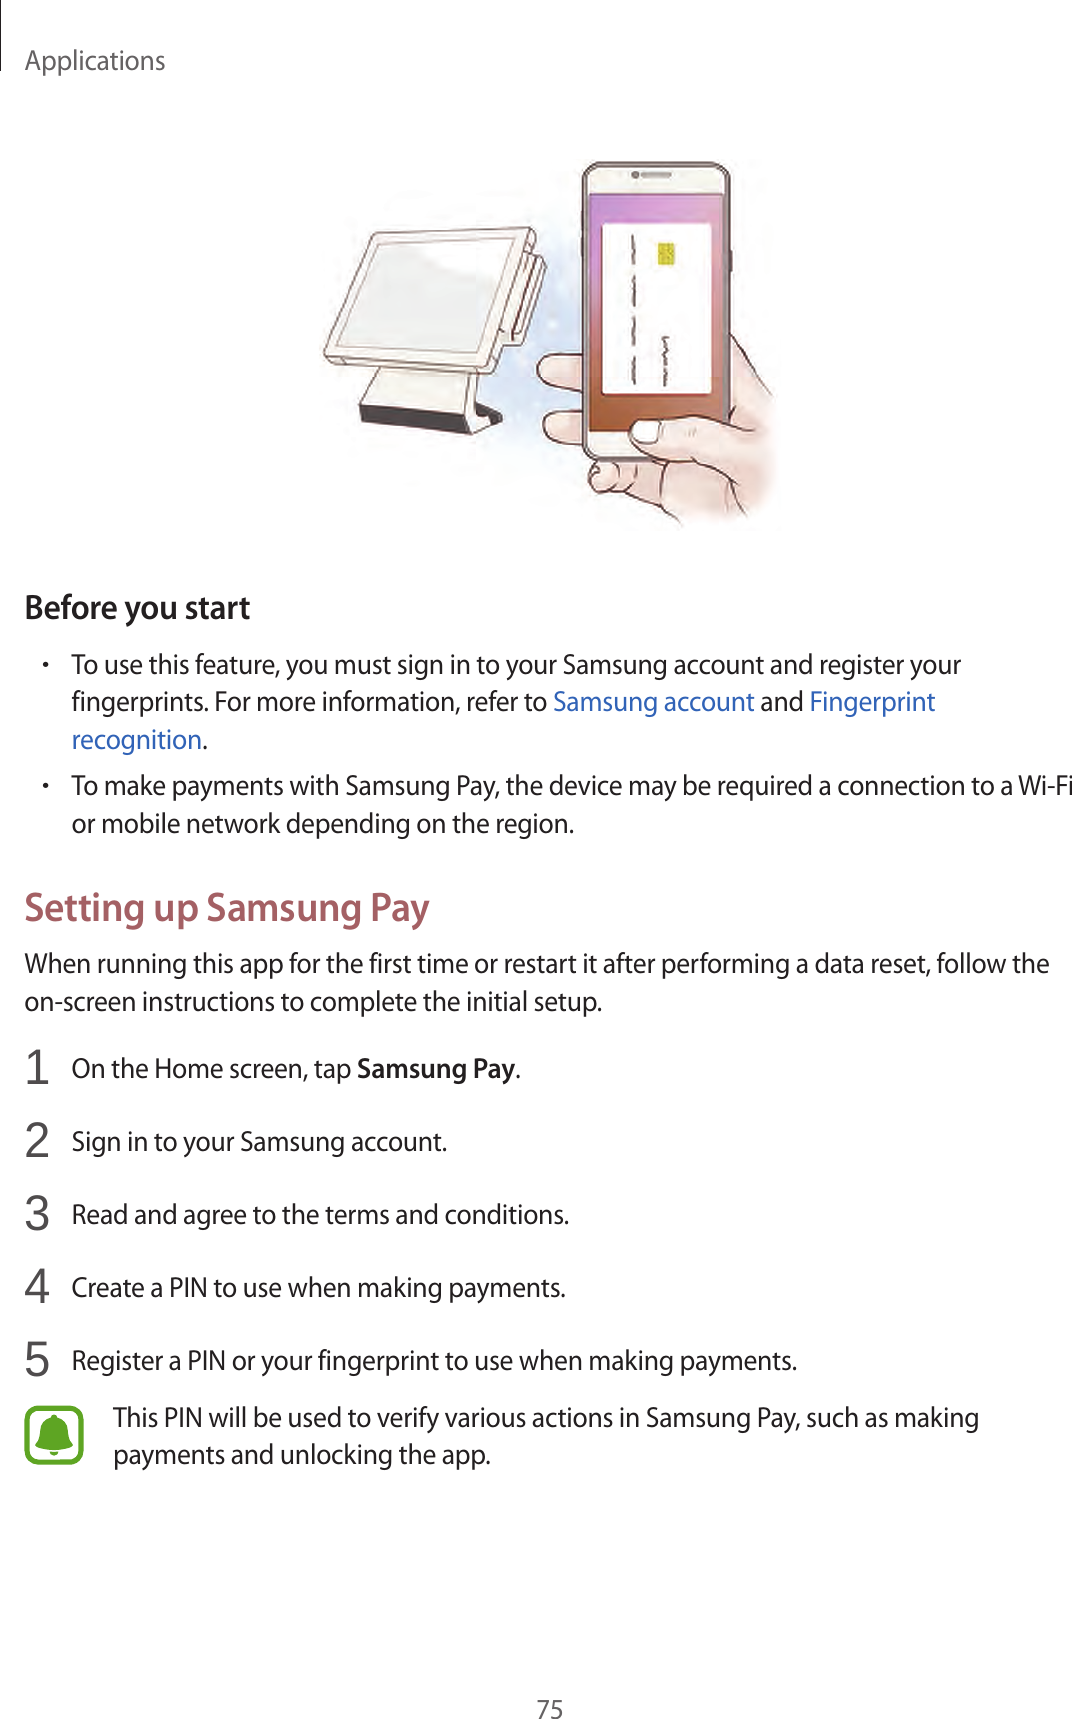 Applications75Before you start•To use this feature, you must sign in to your Samsung account and register your fingerprints. For more information, refer to Samsung account and Fingerprint recognition.•To make payments with Samsung Pay, the device may be required a connection to a Wi-Fi or mobile network depending on the region.Setting up Samsung PayWhen running this app for the first time or restart it after performing a data reset, follow the on-screen instructions to complete the initial setup.1  On the Home screen, tap Samsung Pay.2  Sign in to your Samsung account.3  Read and agree to the terms and conditions.4  Create a PIN to use when making payments.5  Register a PIN or your fingerprint to use when making payments.This PIN will be used to verify various actions in Samsung Pay, such as making payments and unlocking the app.